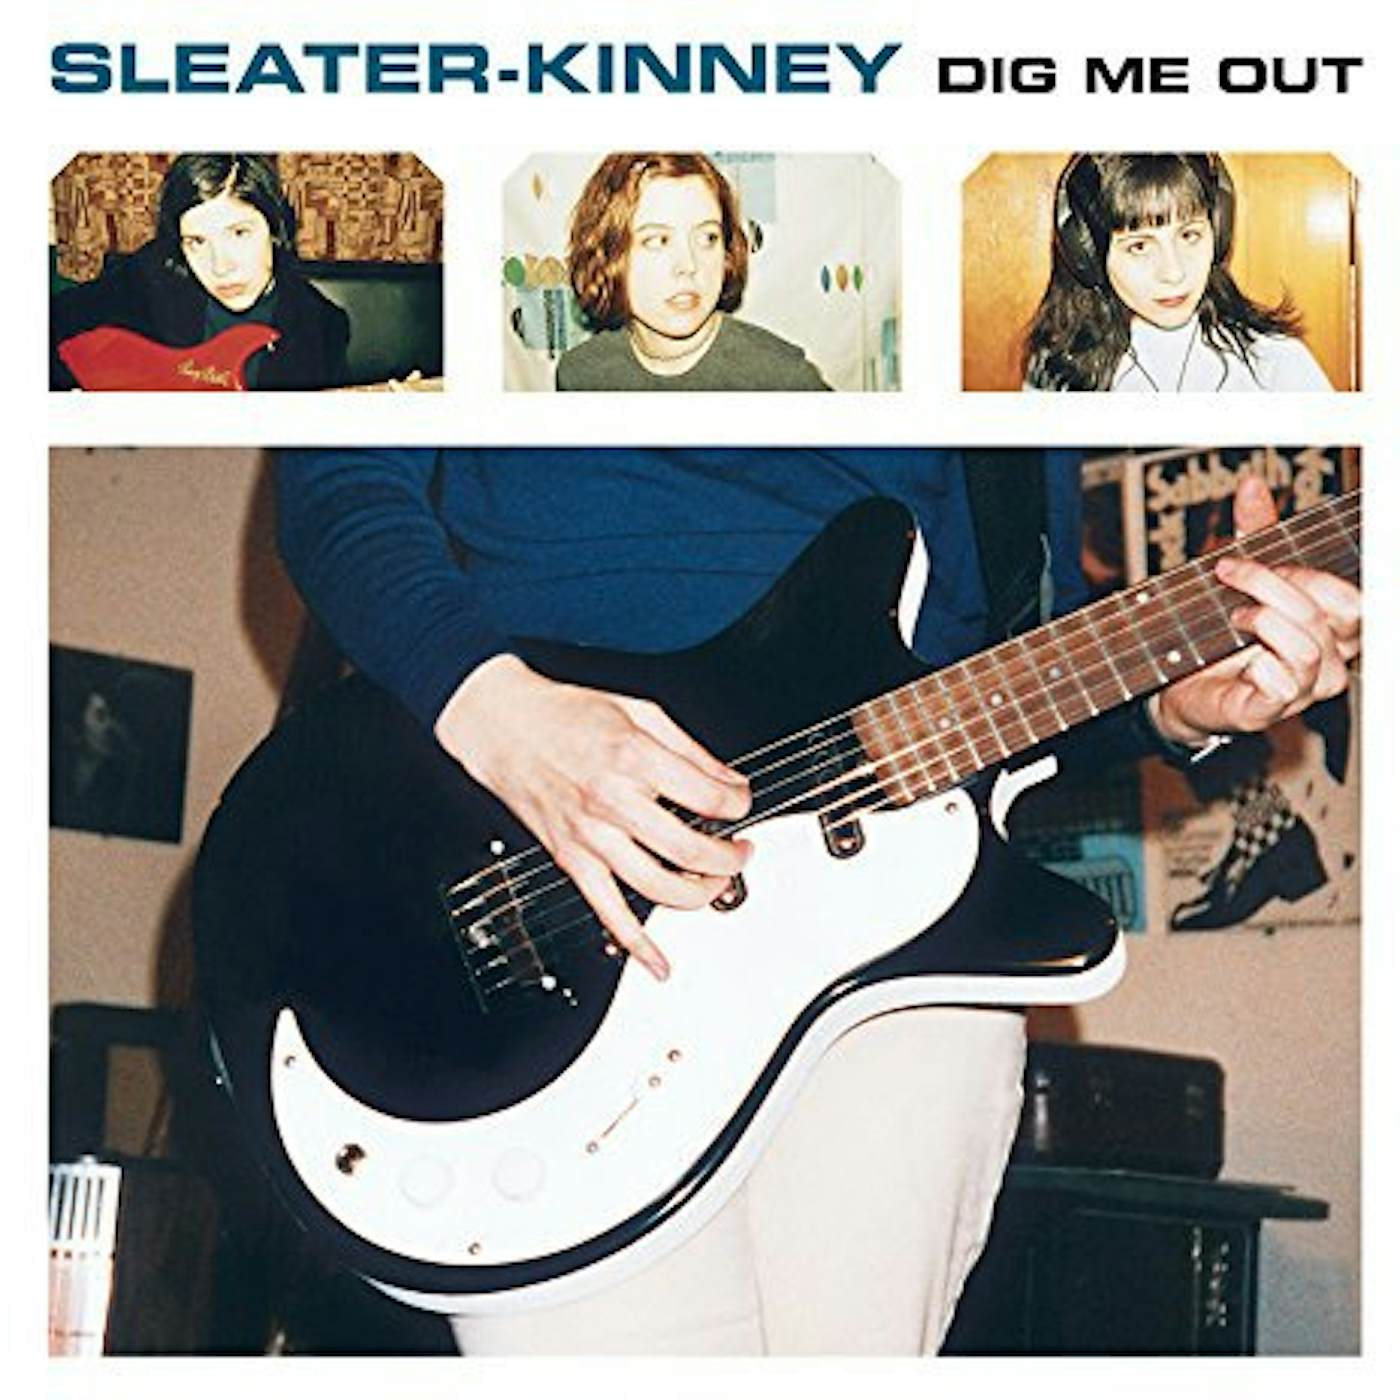 Sleater-Kinney Dig Me Out Vinyl Record